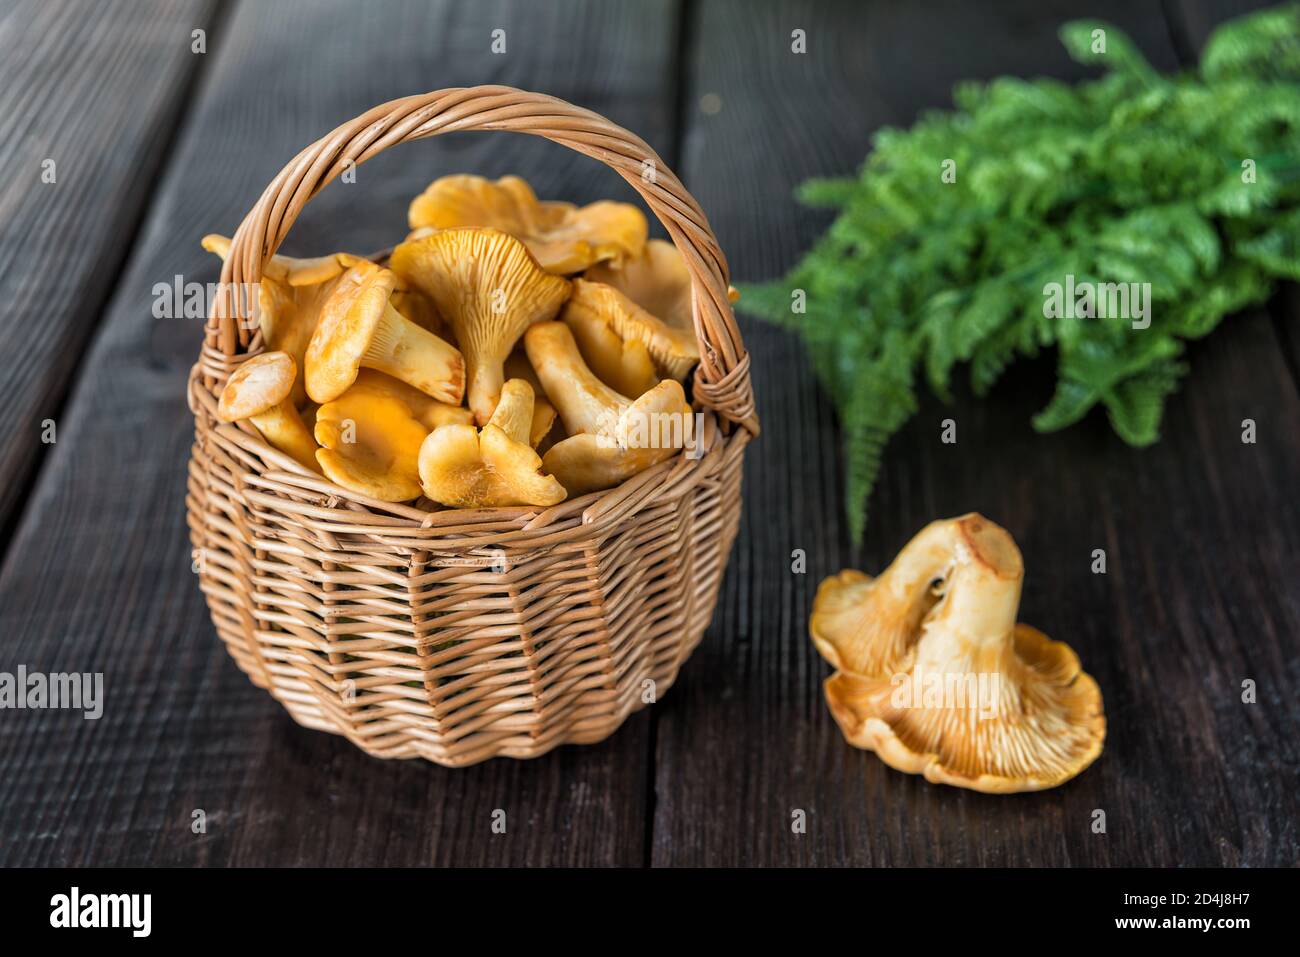 Yellow chanterelle mushrooms in a wicker basket on a dark wooden table Stock Photo